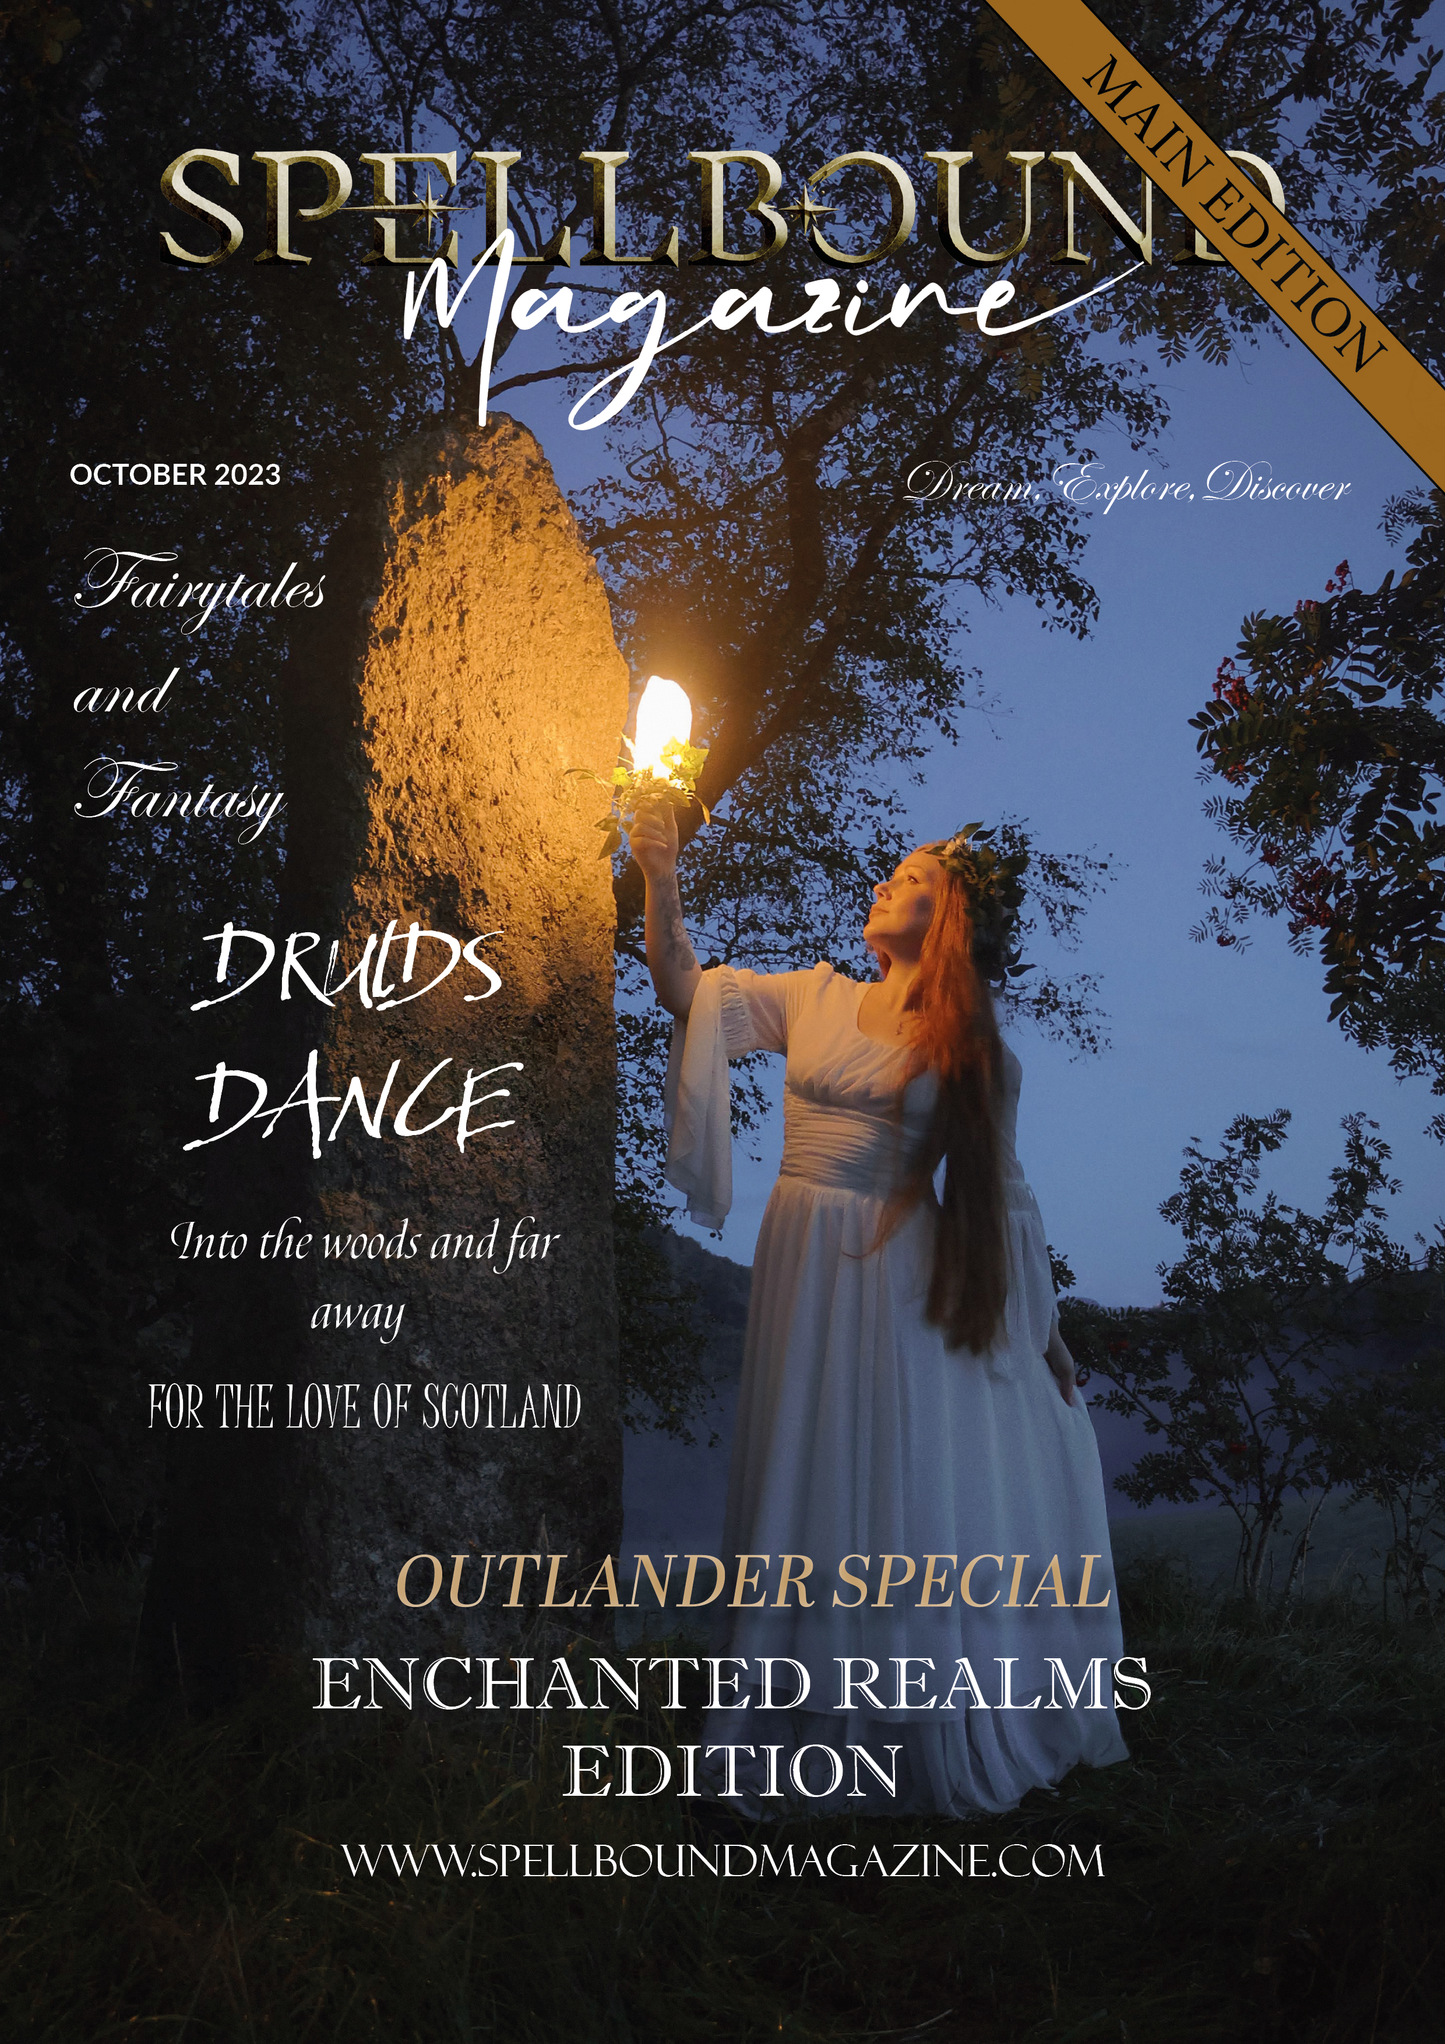 Spellbound Fairytale and Fantasy Edition October 2023: The Outlander's Time Issue